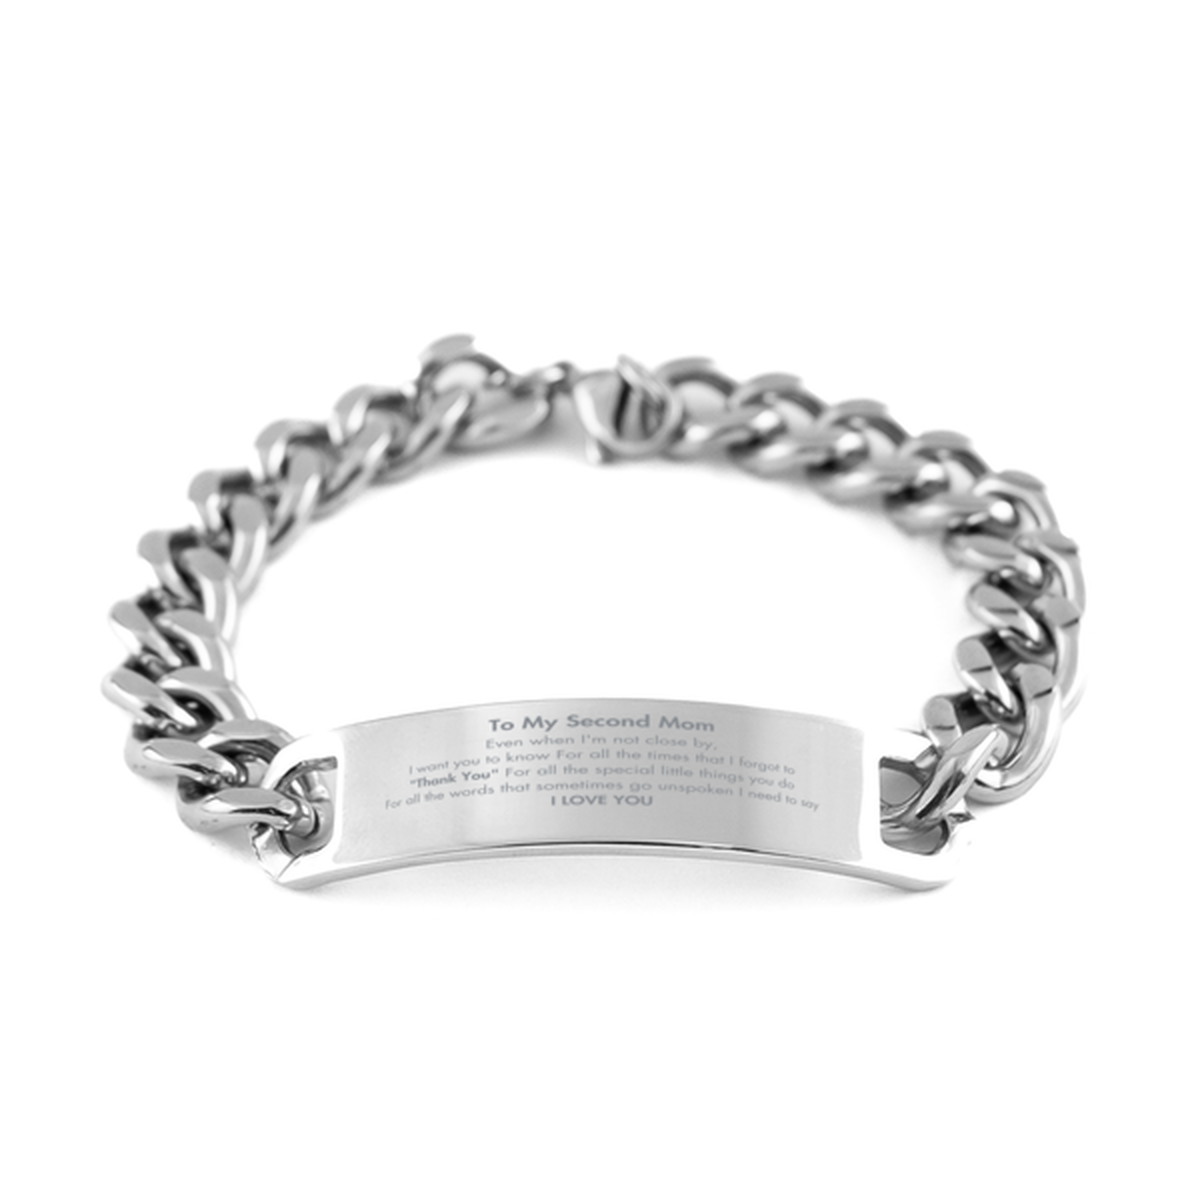 Thank You Gifts for Second Mom, Keepsake Cuban Chain Stainless Steel Bracelet Gifts for Second Mom Birthday Mother's day Father's Day Second Mom For all the words That sometimes go unspoken I need to say I LOVE YOU